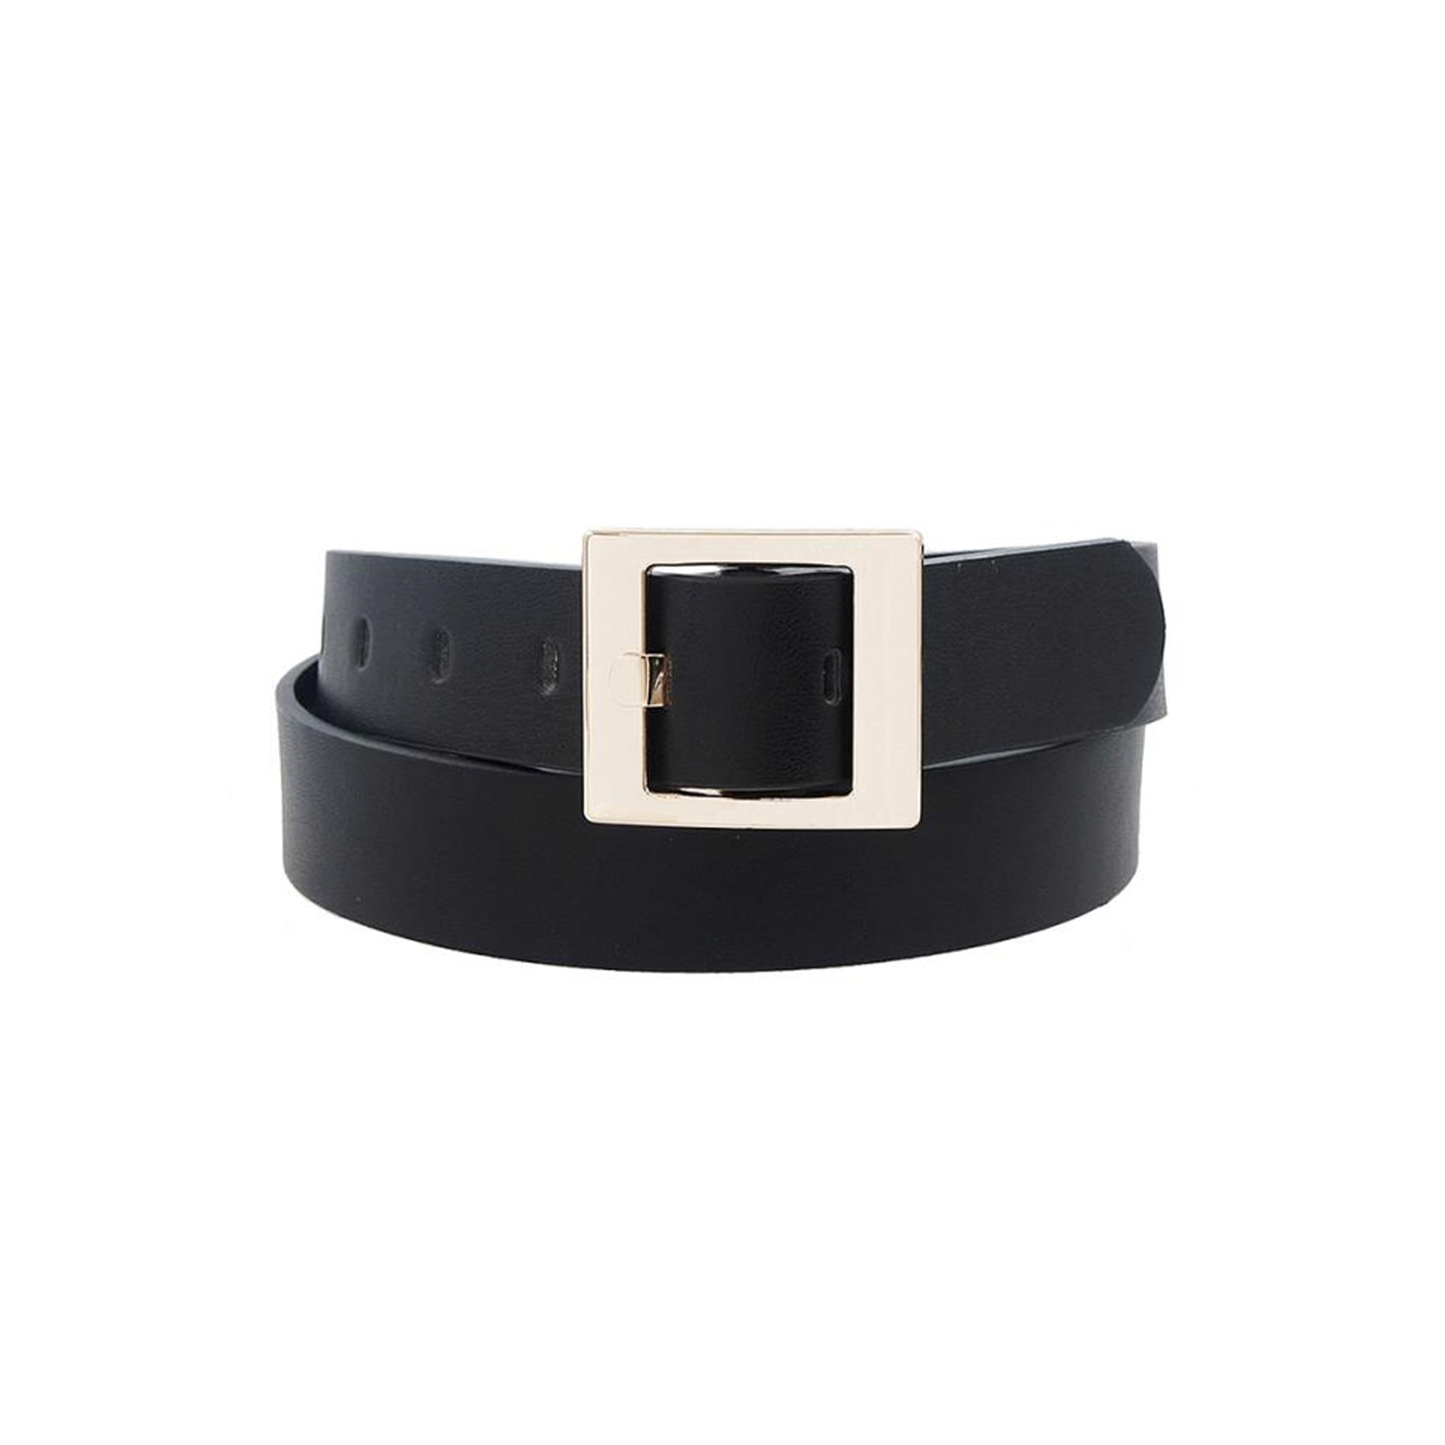 Square Buckle Belt. Classic style with an easy fit, this belt keeps your look cool and confident